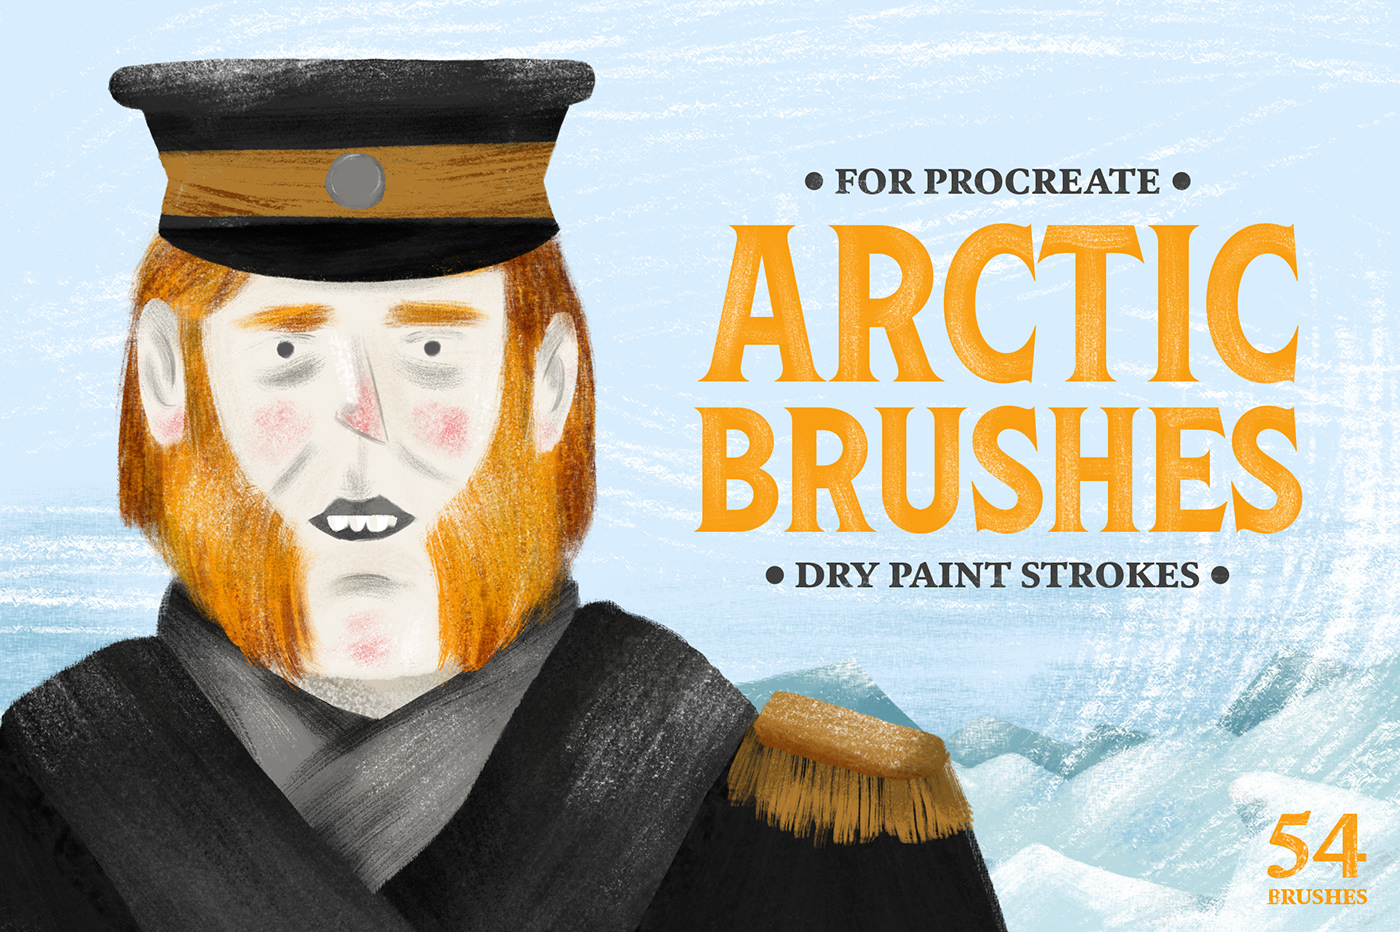 procreate brushes free brushes freebie dry paint brushes texture free download PROCREATE ART character illustration cartoon Comic Book